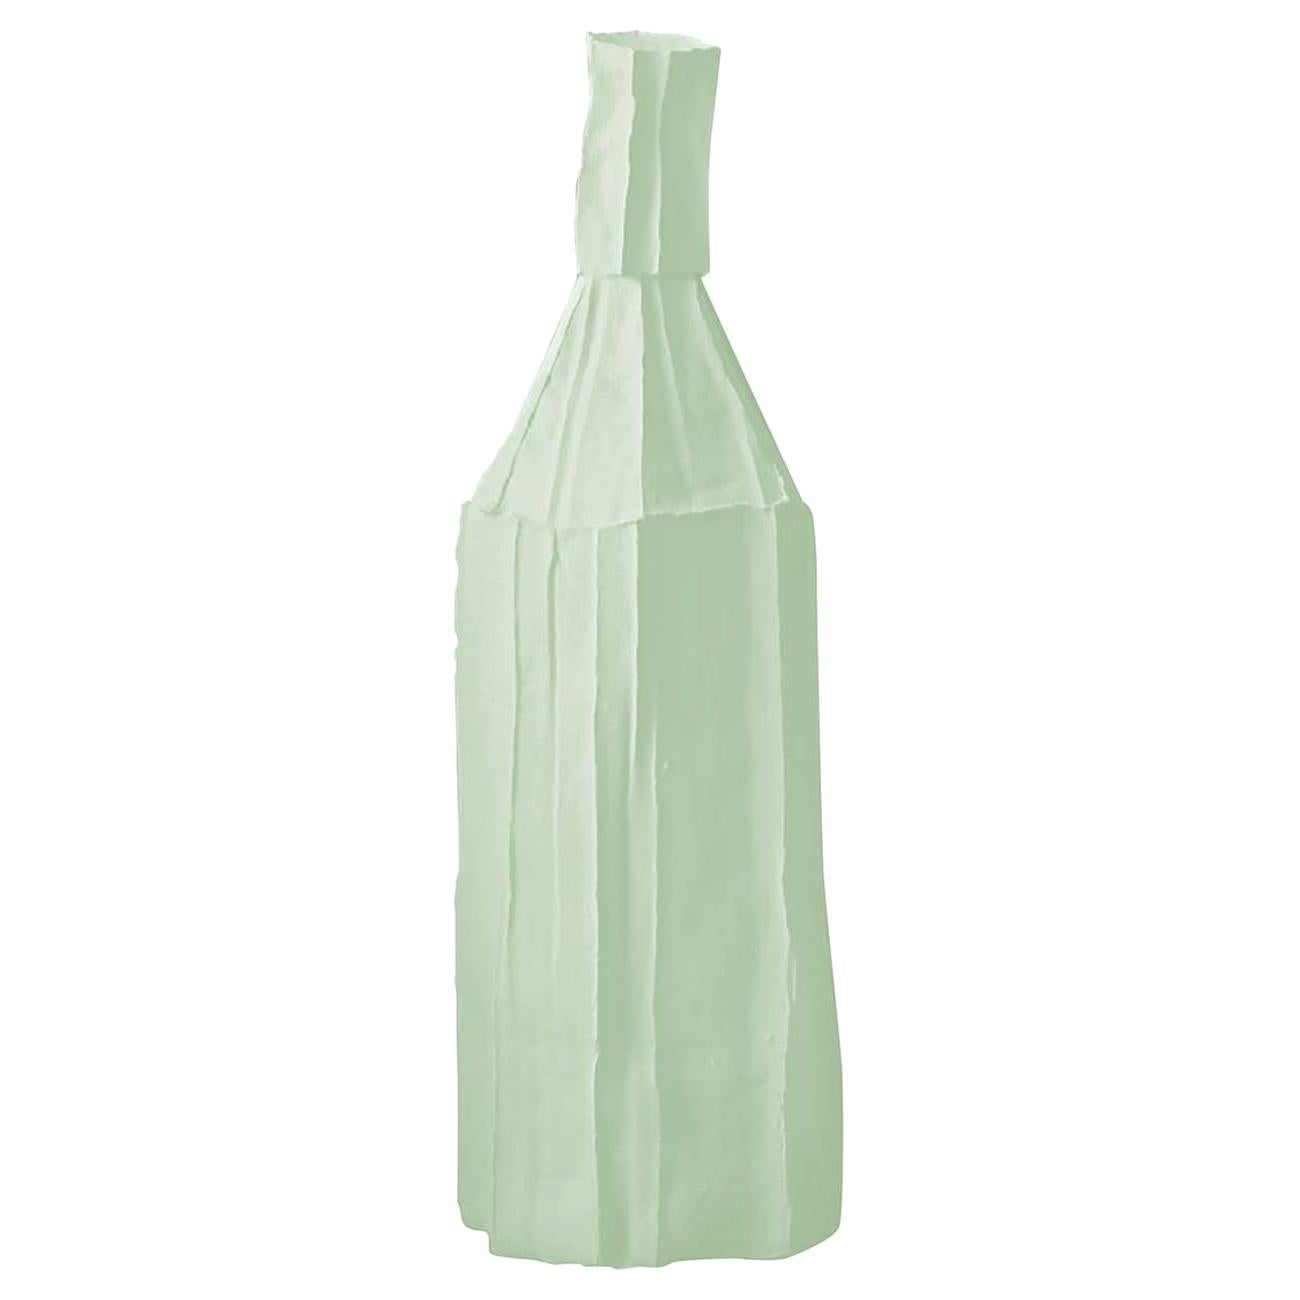 Cartocci Light Mint Green Decorative Bottle by Paola Paronetto For Sale